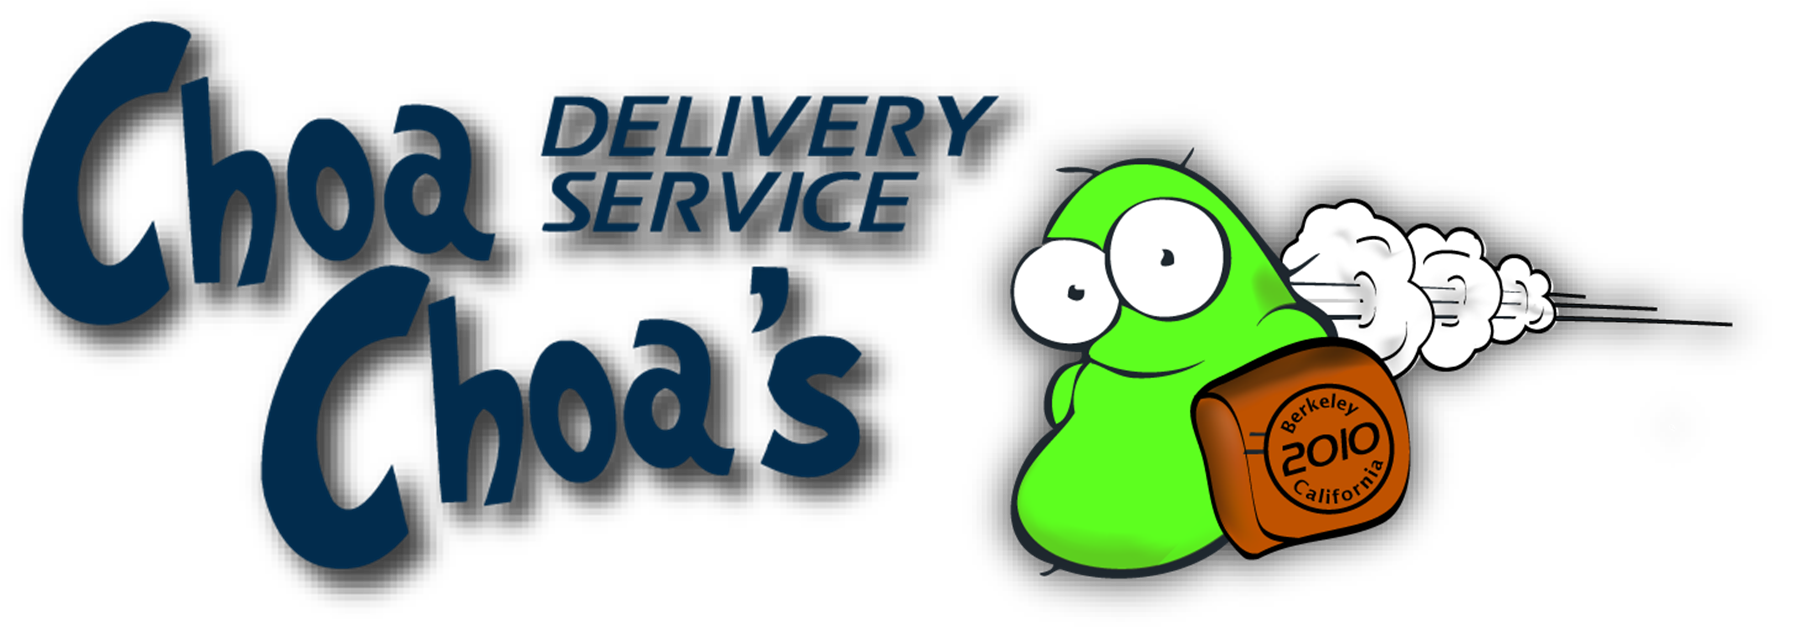 ChoaChoa delivery header.png